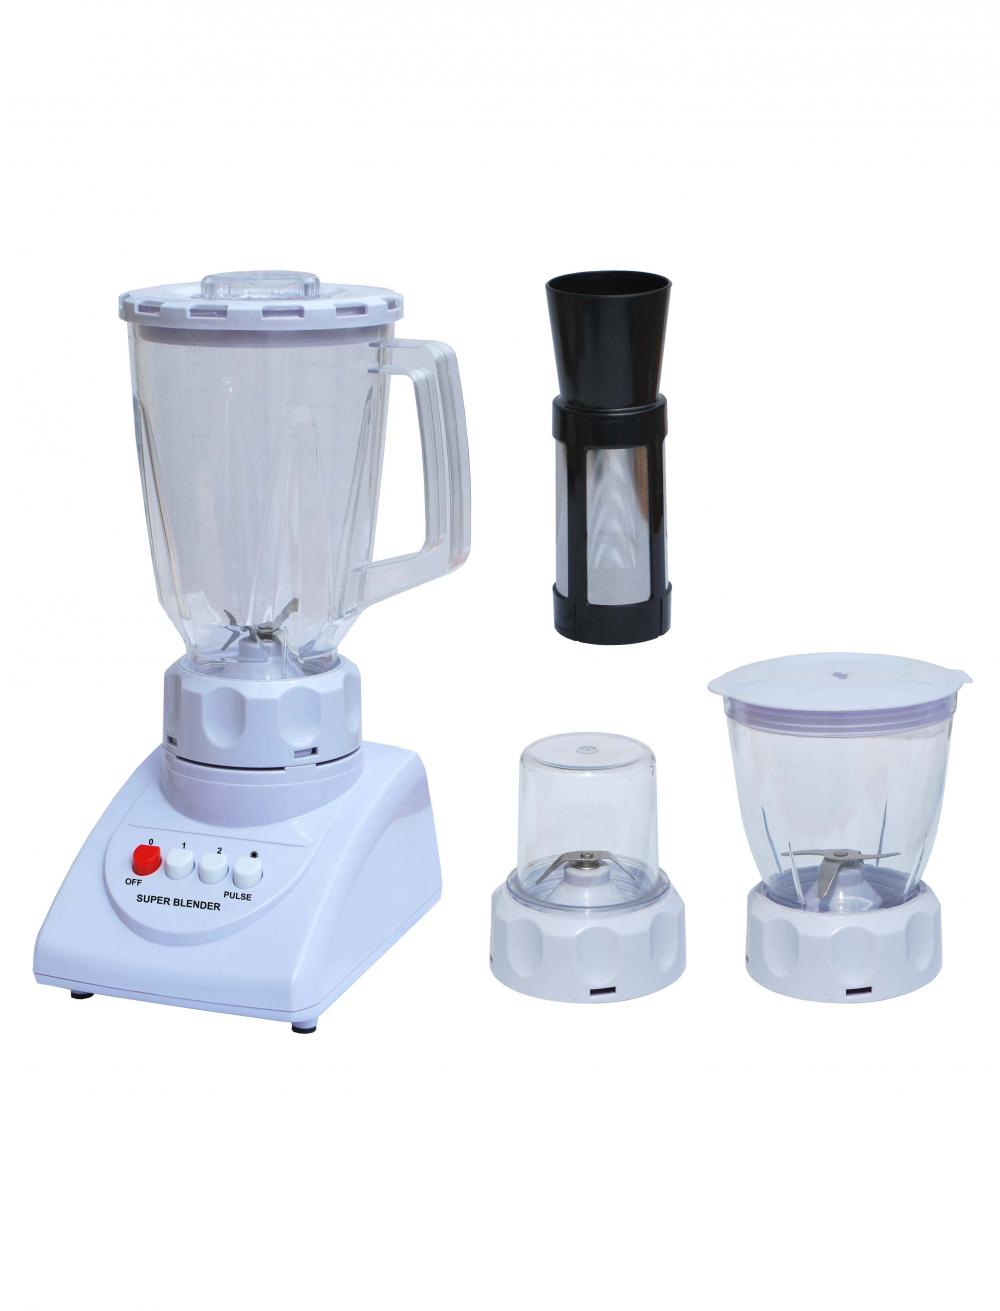 High quality and efficient electric mixer